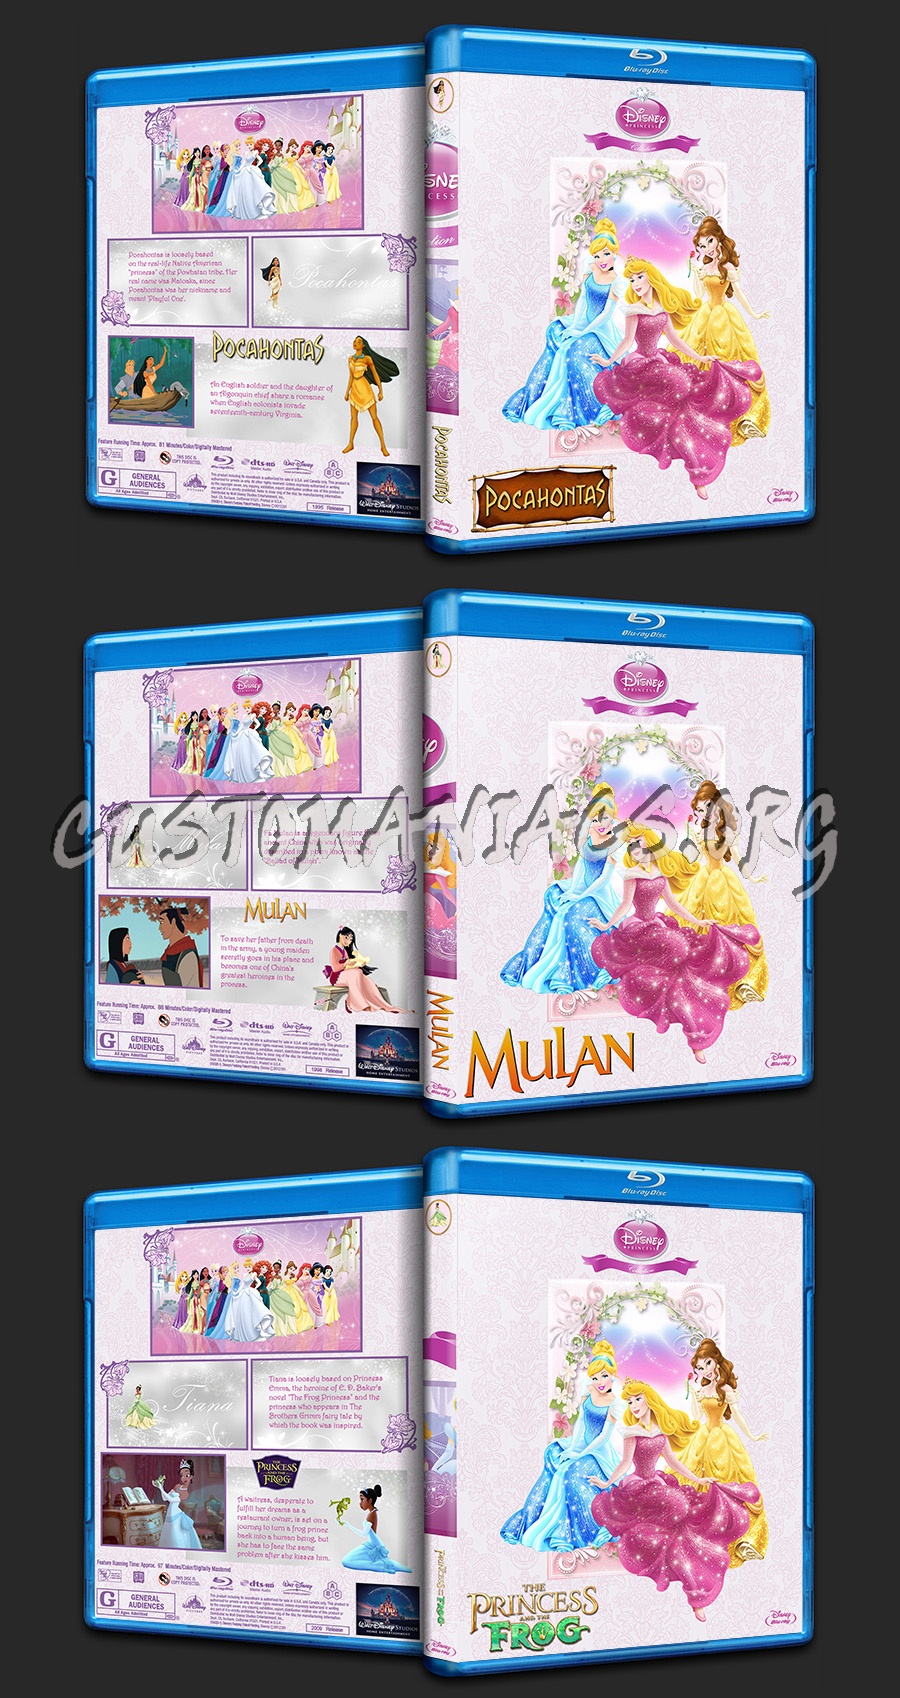 The Disney Princess Collection blu-ray cover